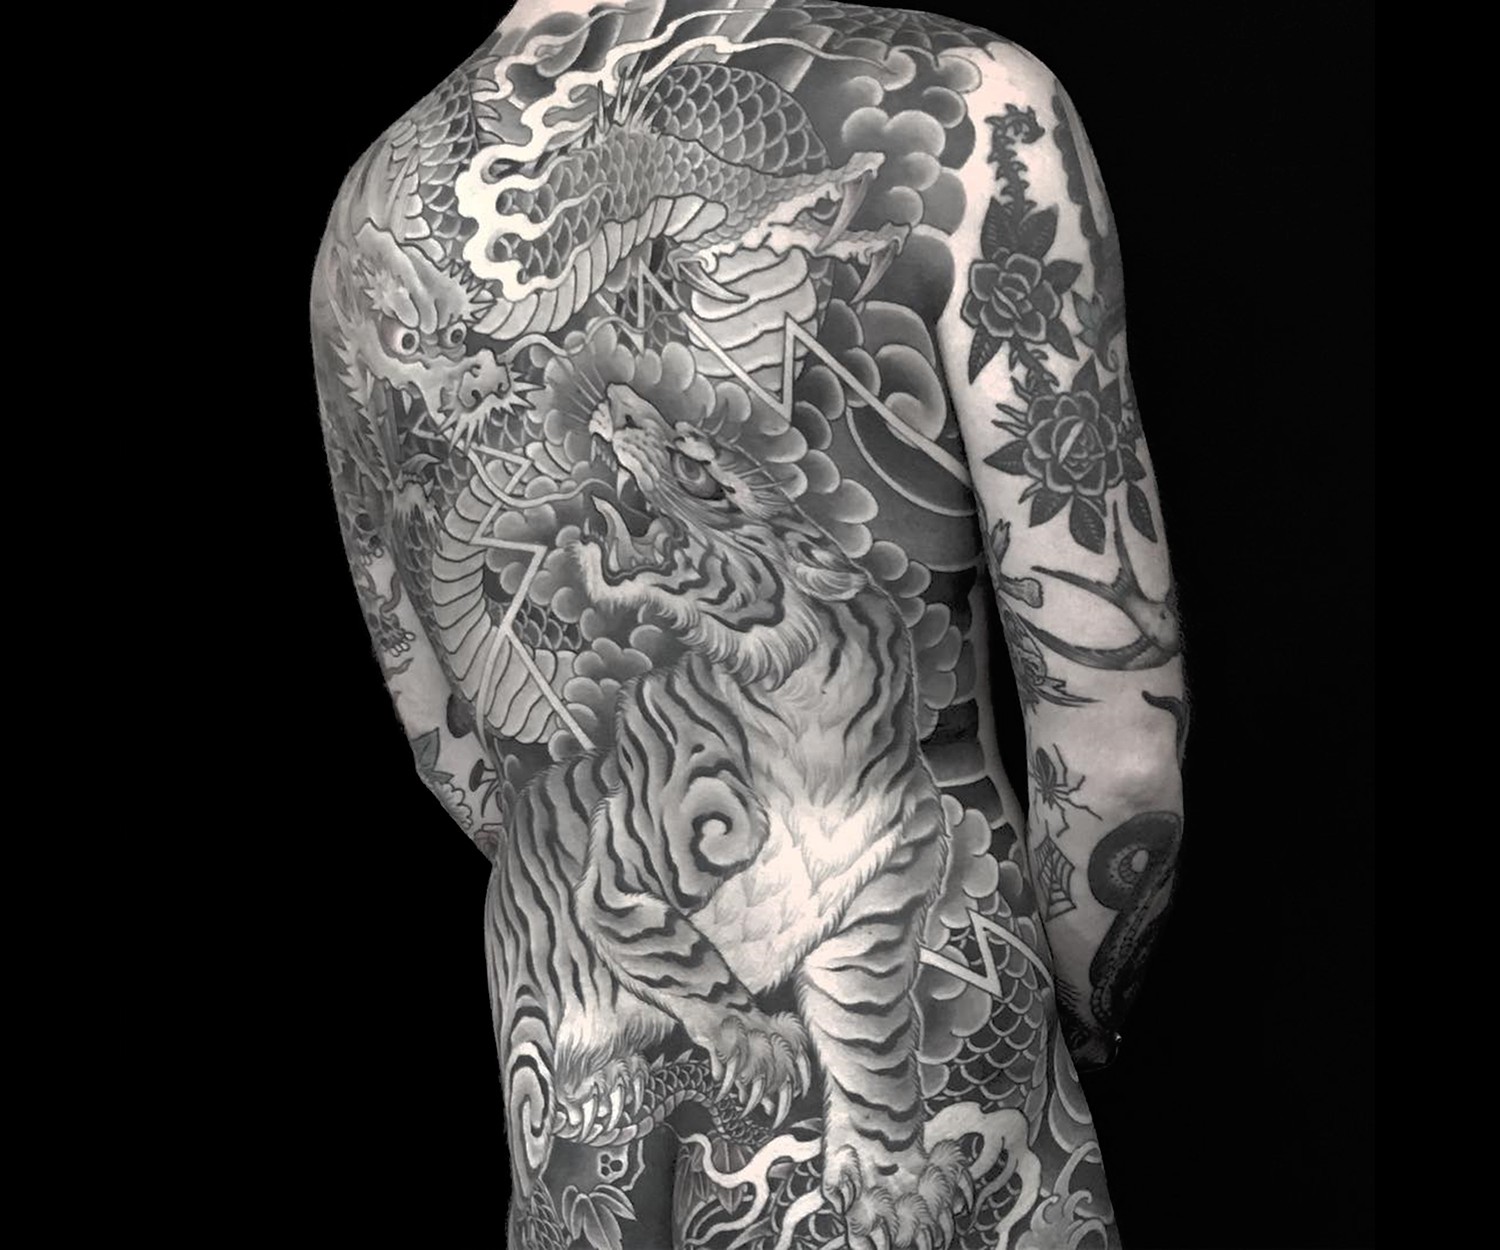 Japanese tattoo on back, tiger, black and grey by chris garver